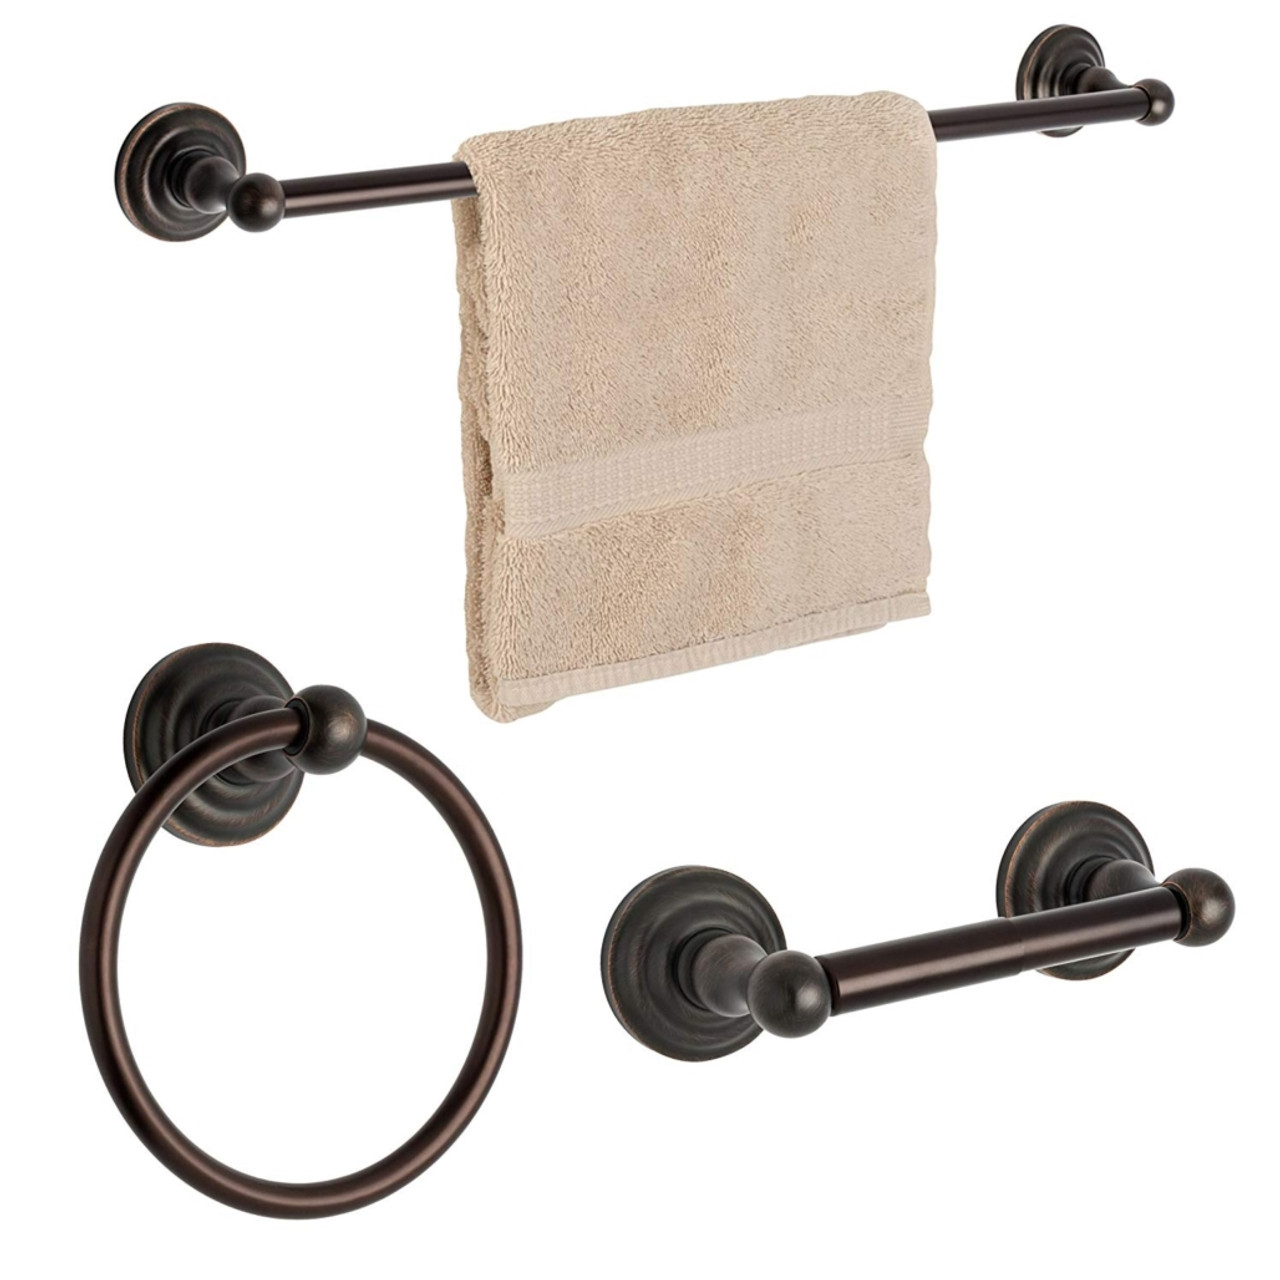 Dynasty Hardware 3800-ORB-3 Palisades Series Bathroom Hardware Set, Oil  Rubbed Bronze, 3-Piece Set, with 24" Towel Bar - Dynasty Hardware